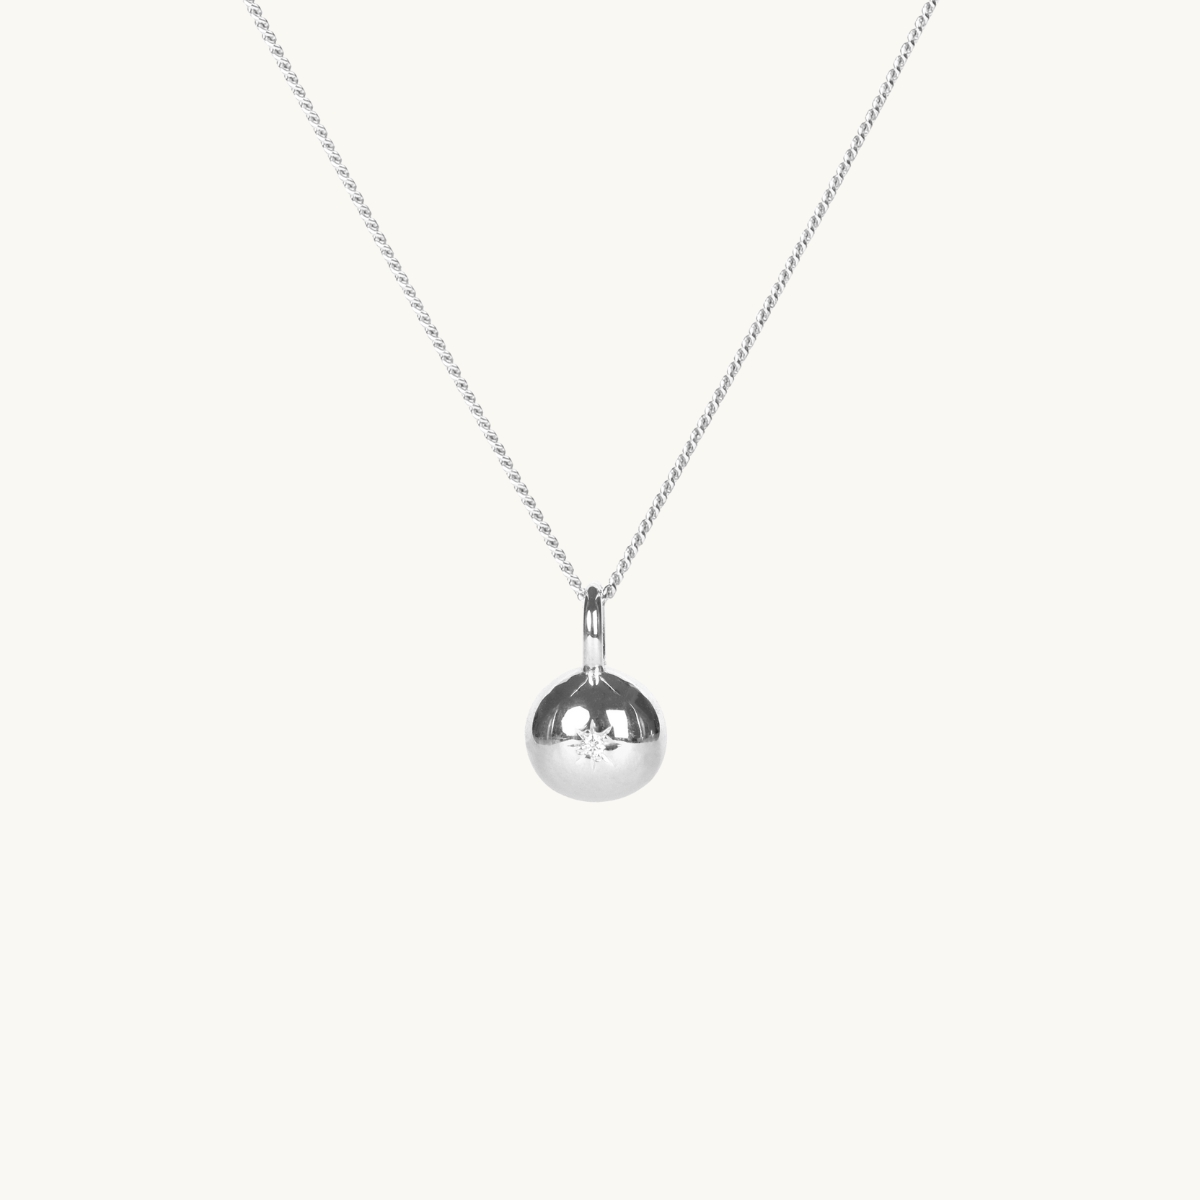 A round pendant in silver with a white diamond on a silver chain